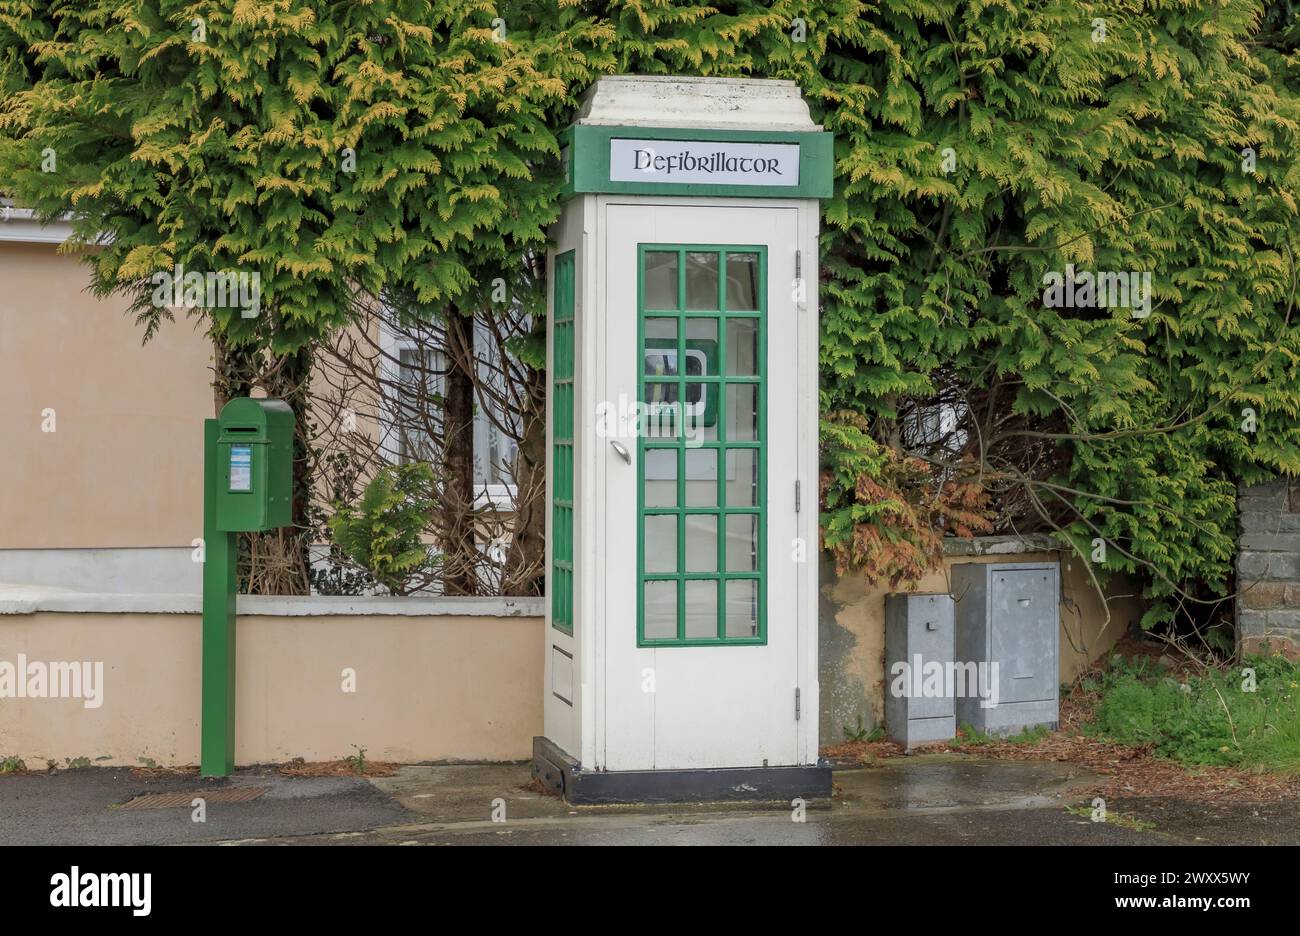 A defibrillator machine kept for the public in an old green irish phone box Stock Photo